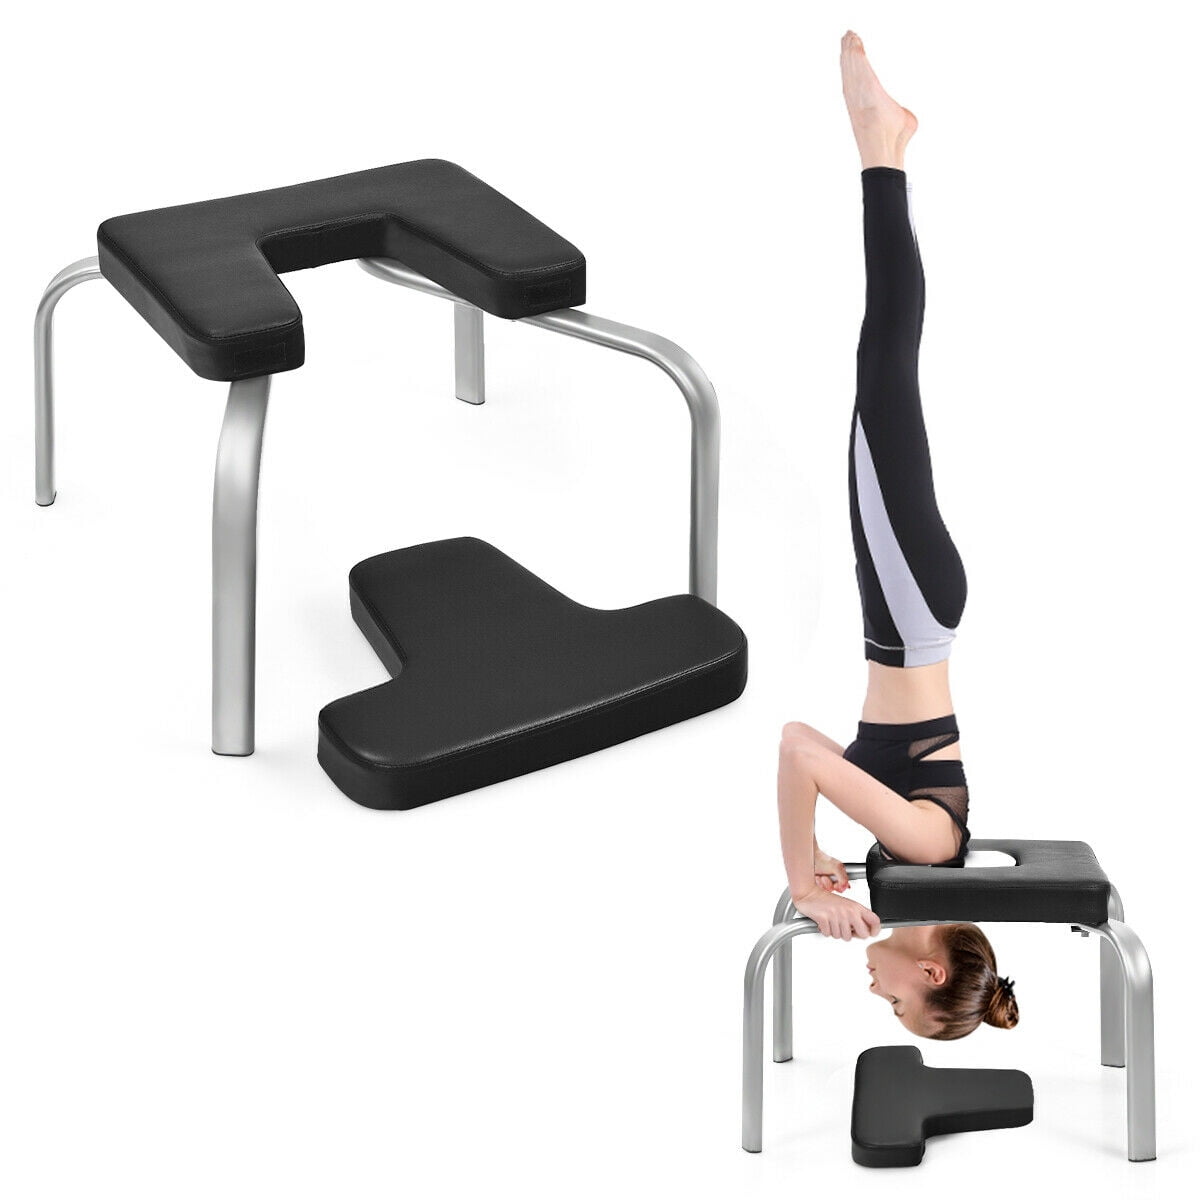 Yoga Headstand Bench,Sundlight Yoga Aids Workout Chair Headstand Stool Multifunctional Sports Exercise Bench Fitness Equipments Build Up Body